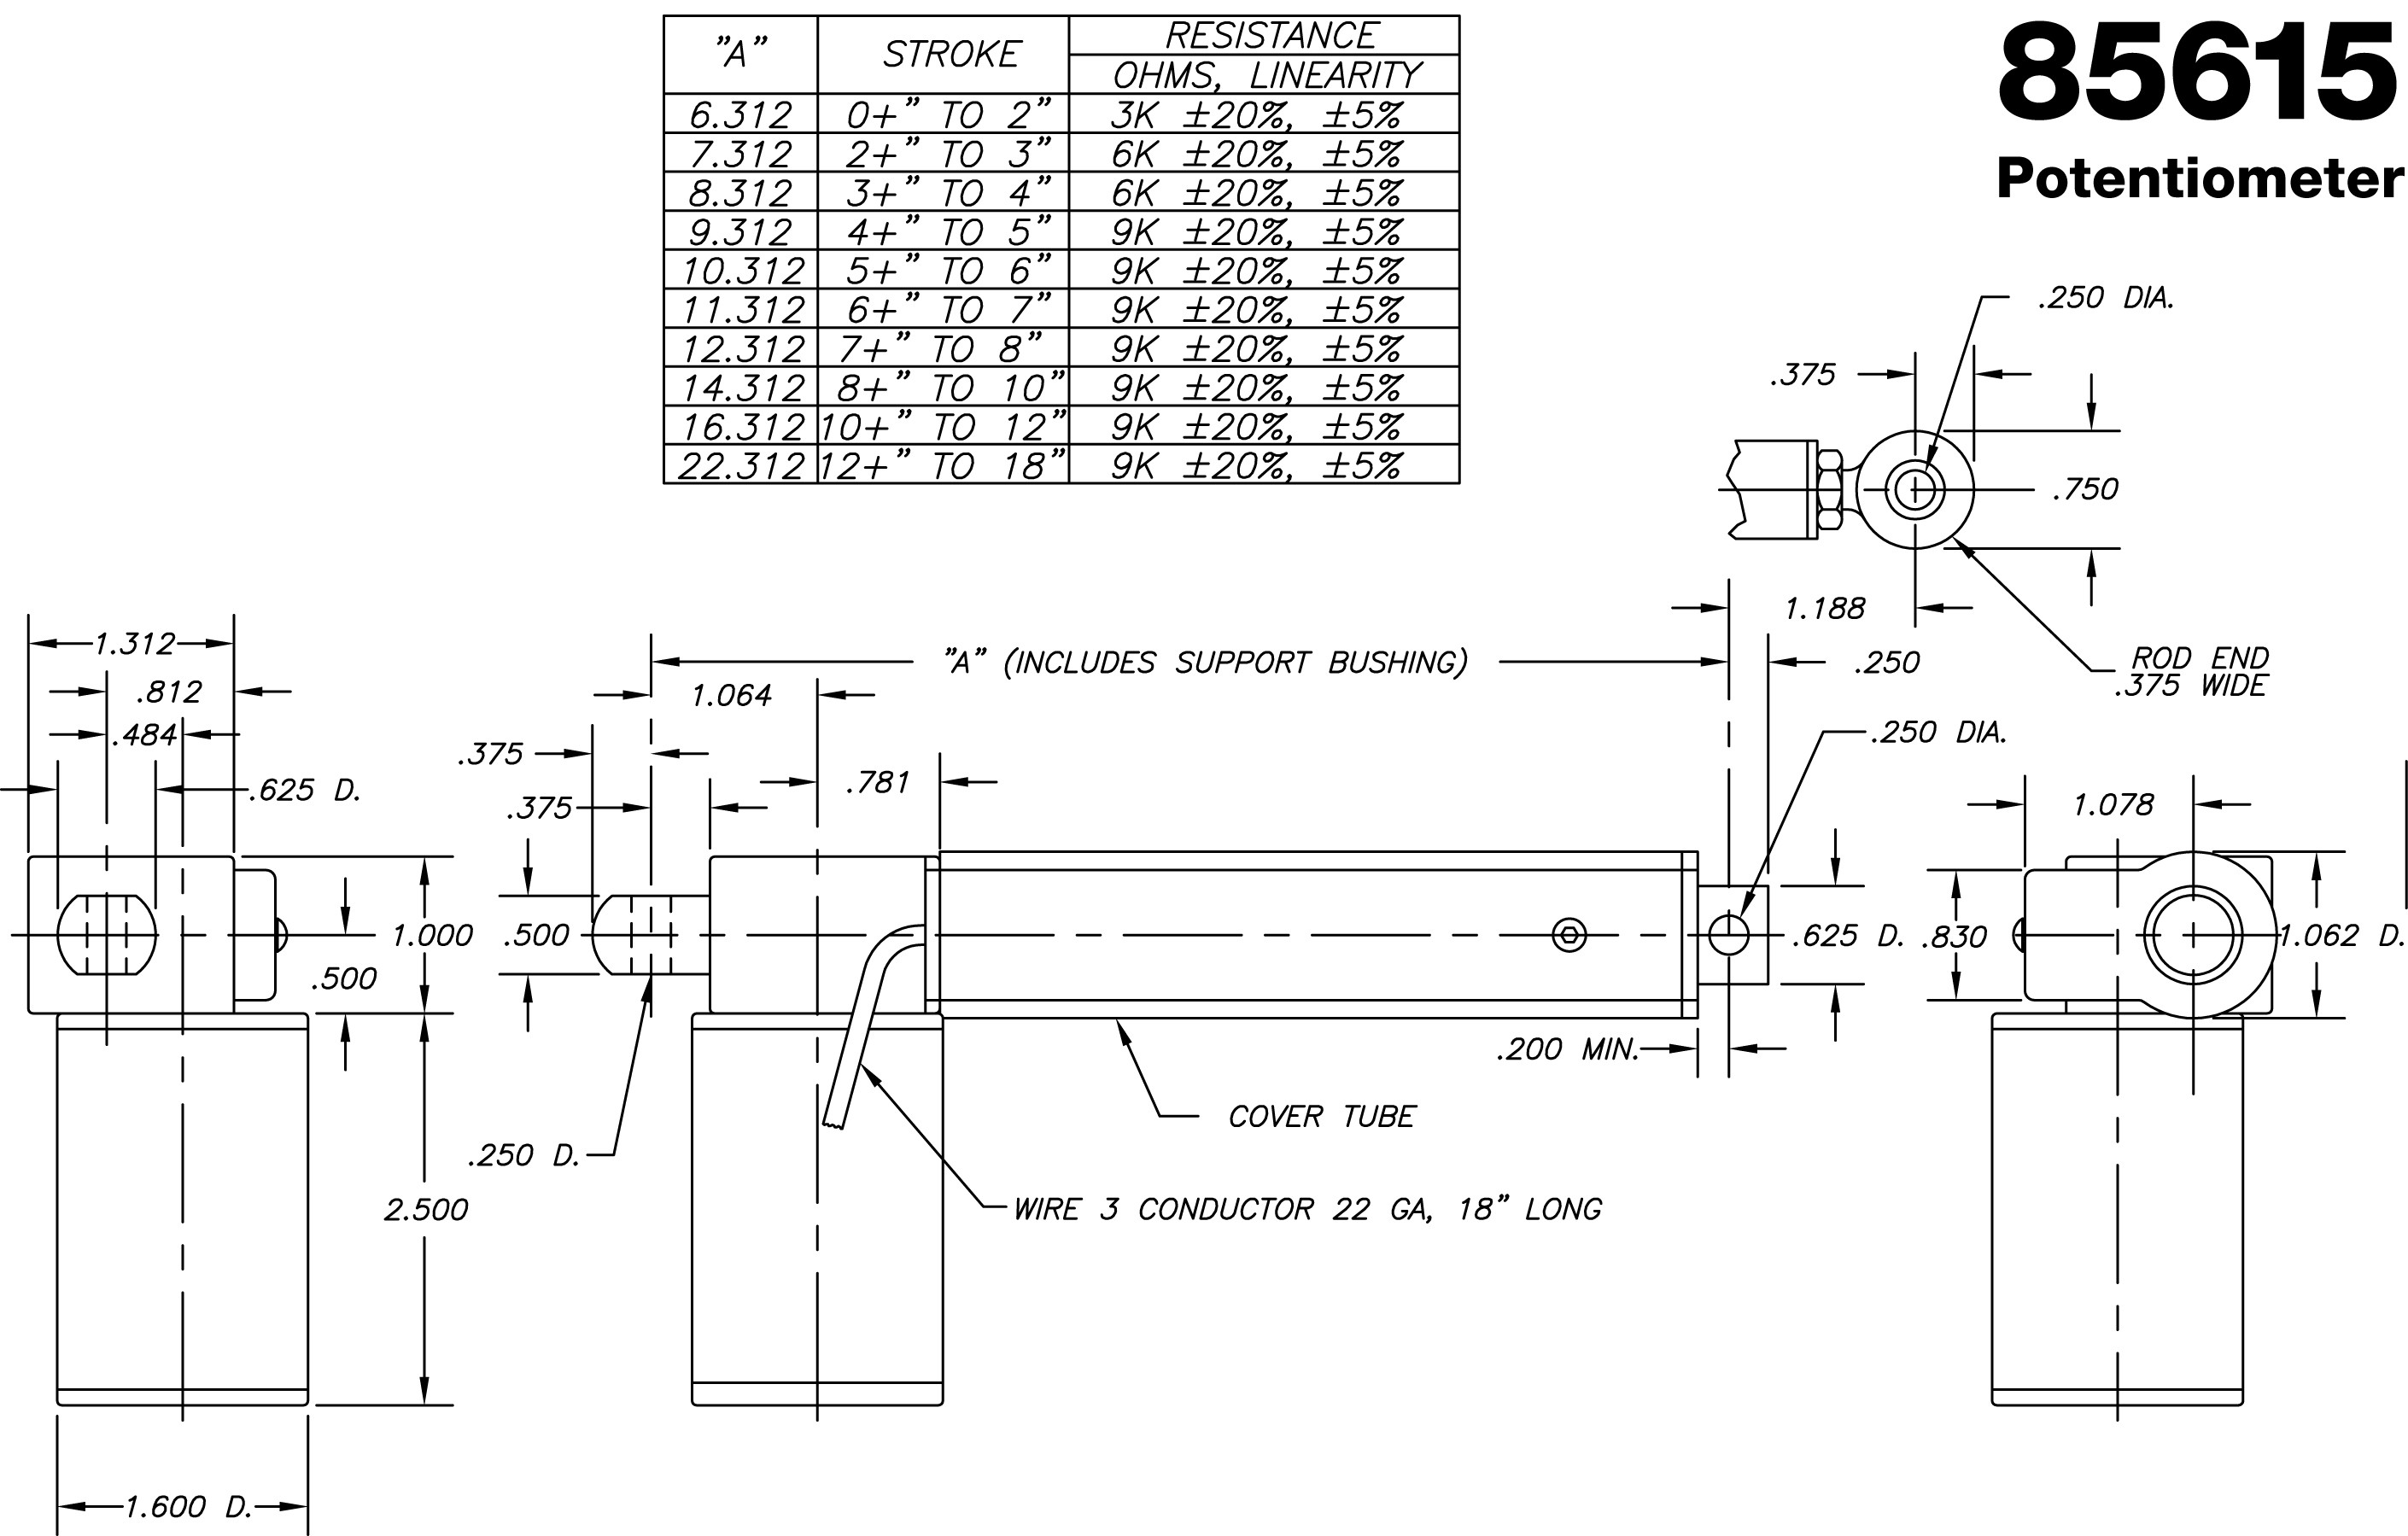 Linear Actuator Wiring Diagram Motion Systems Of Linear Actuator Wiring Diagram